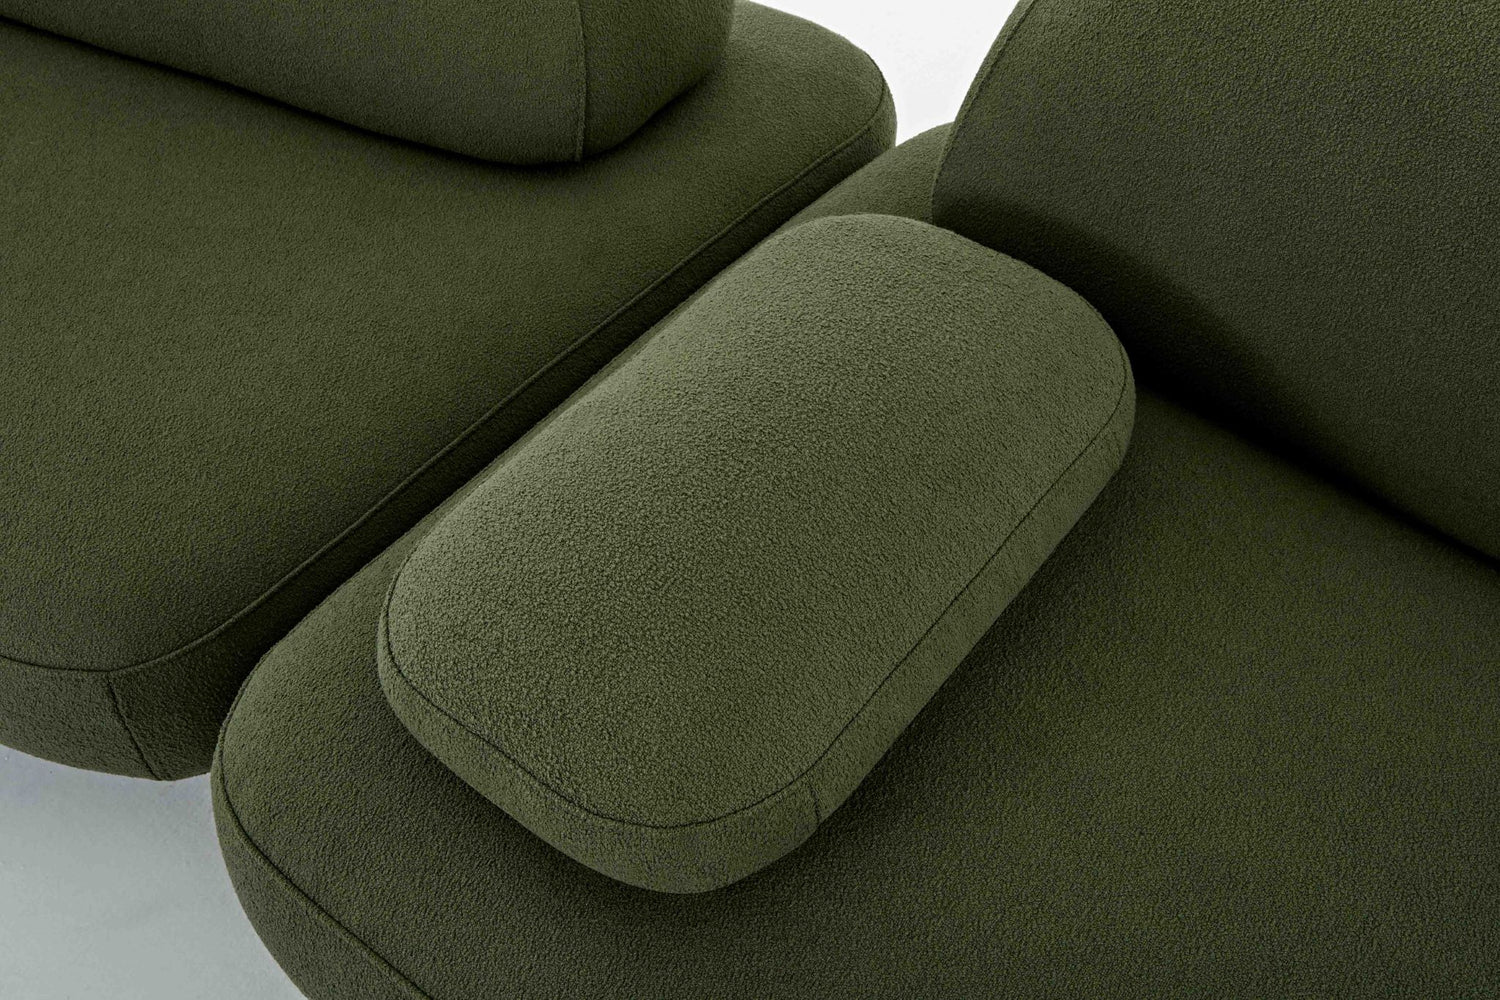 Ethos Plus green modular sofa showing the moveable arm rest.